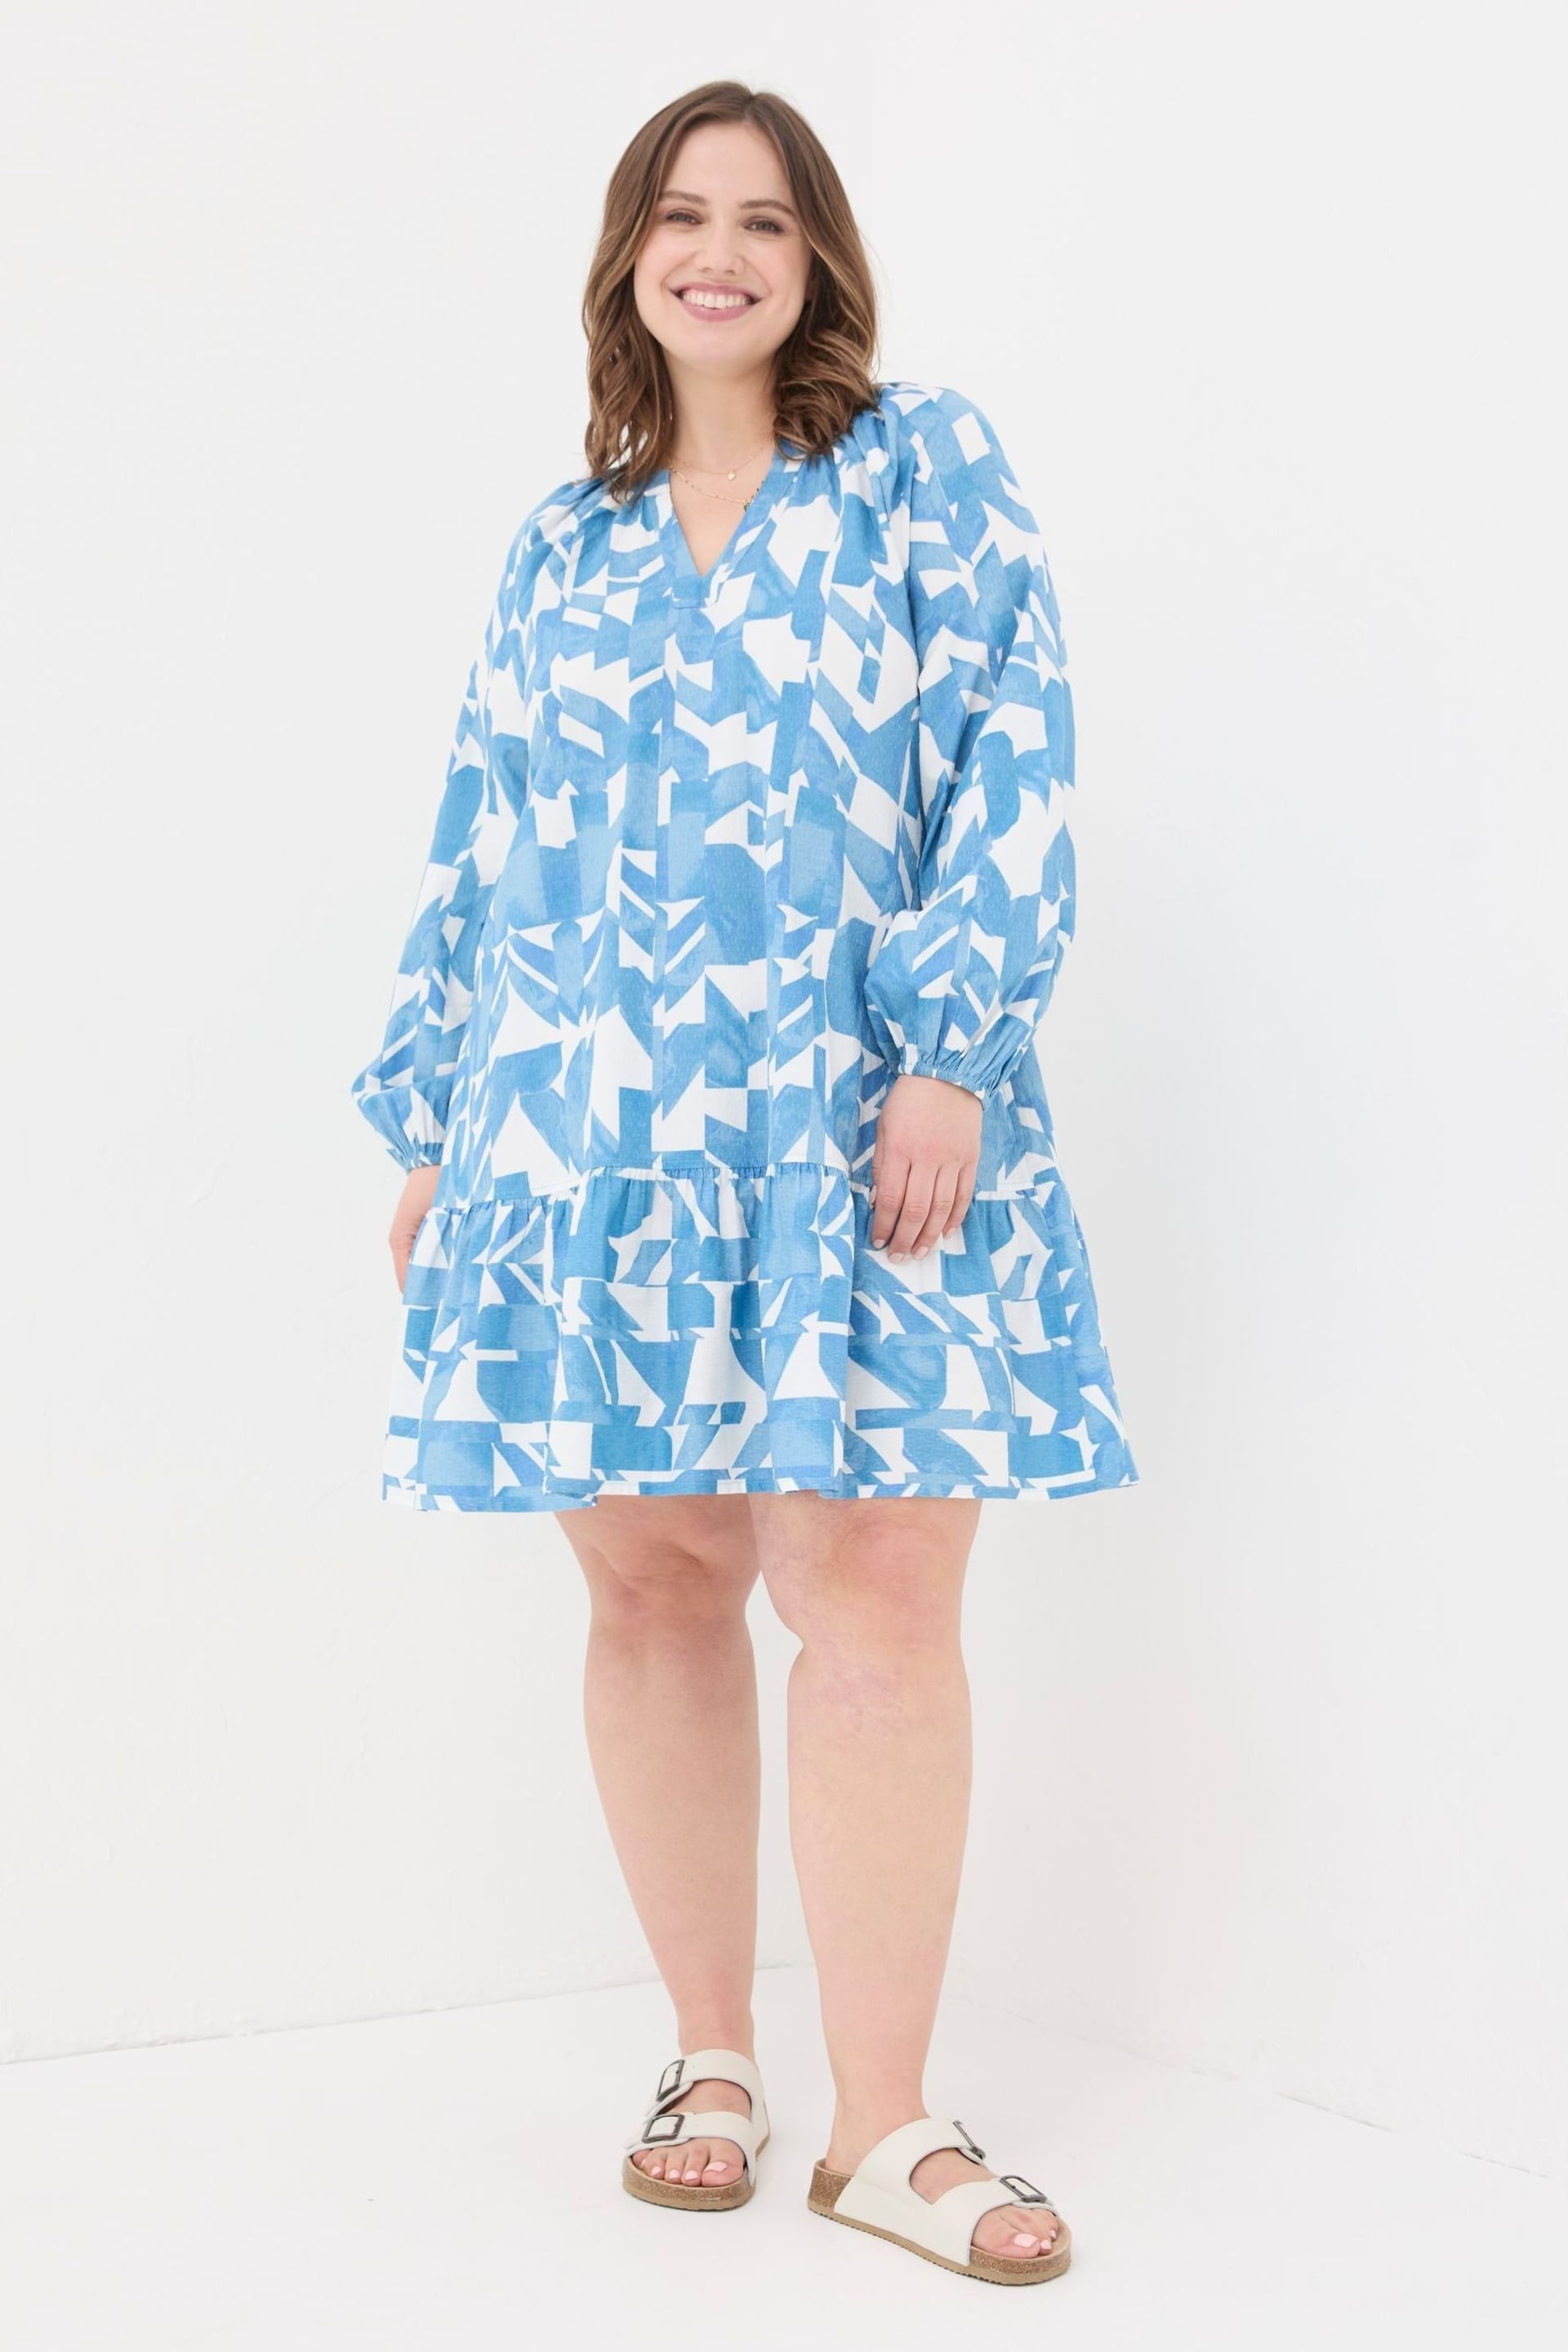 FatFace Blue Amy Med Geo Dress - Image 3 of 7